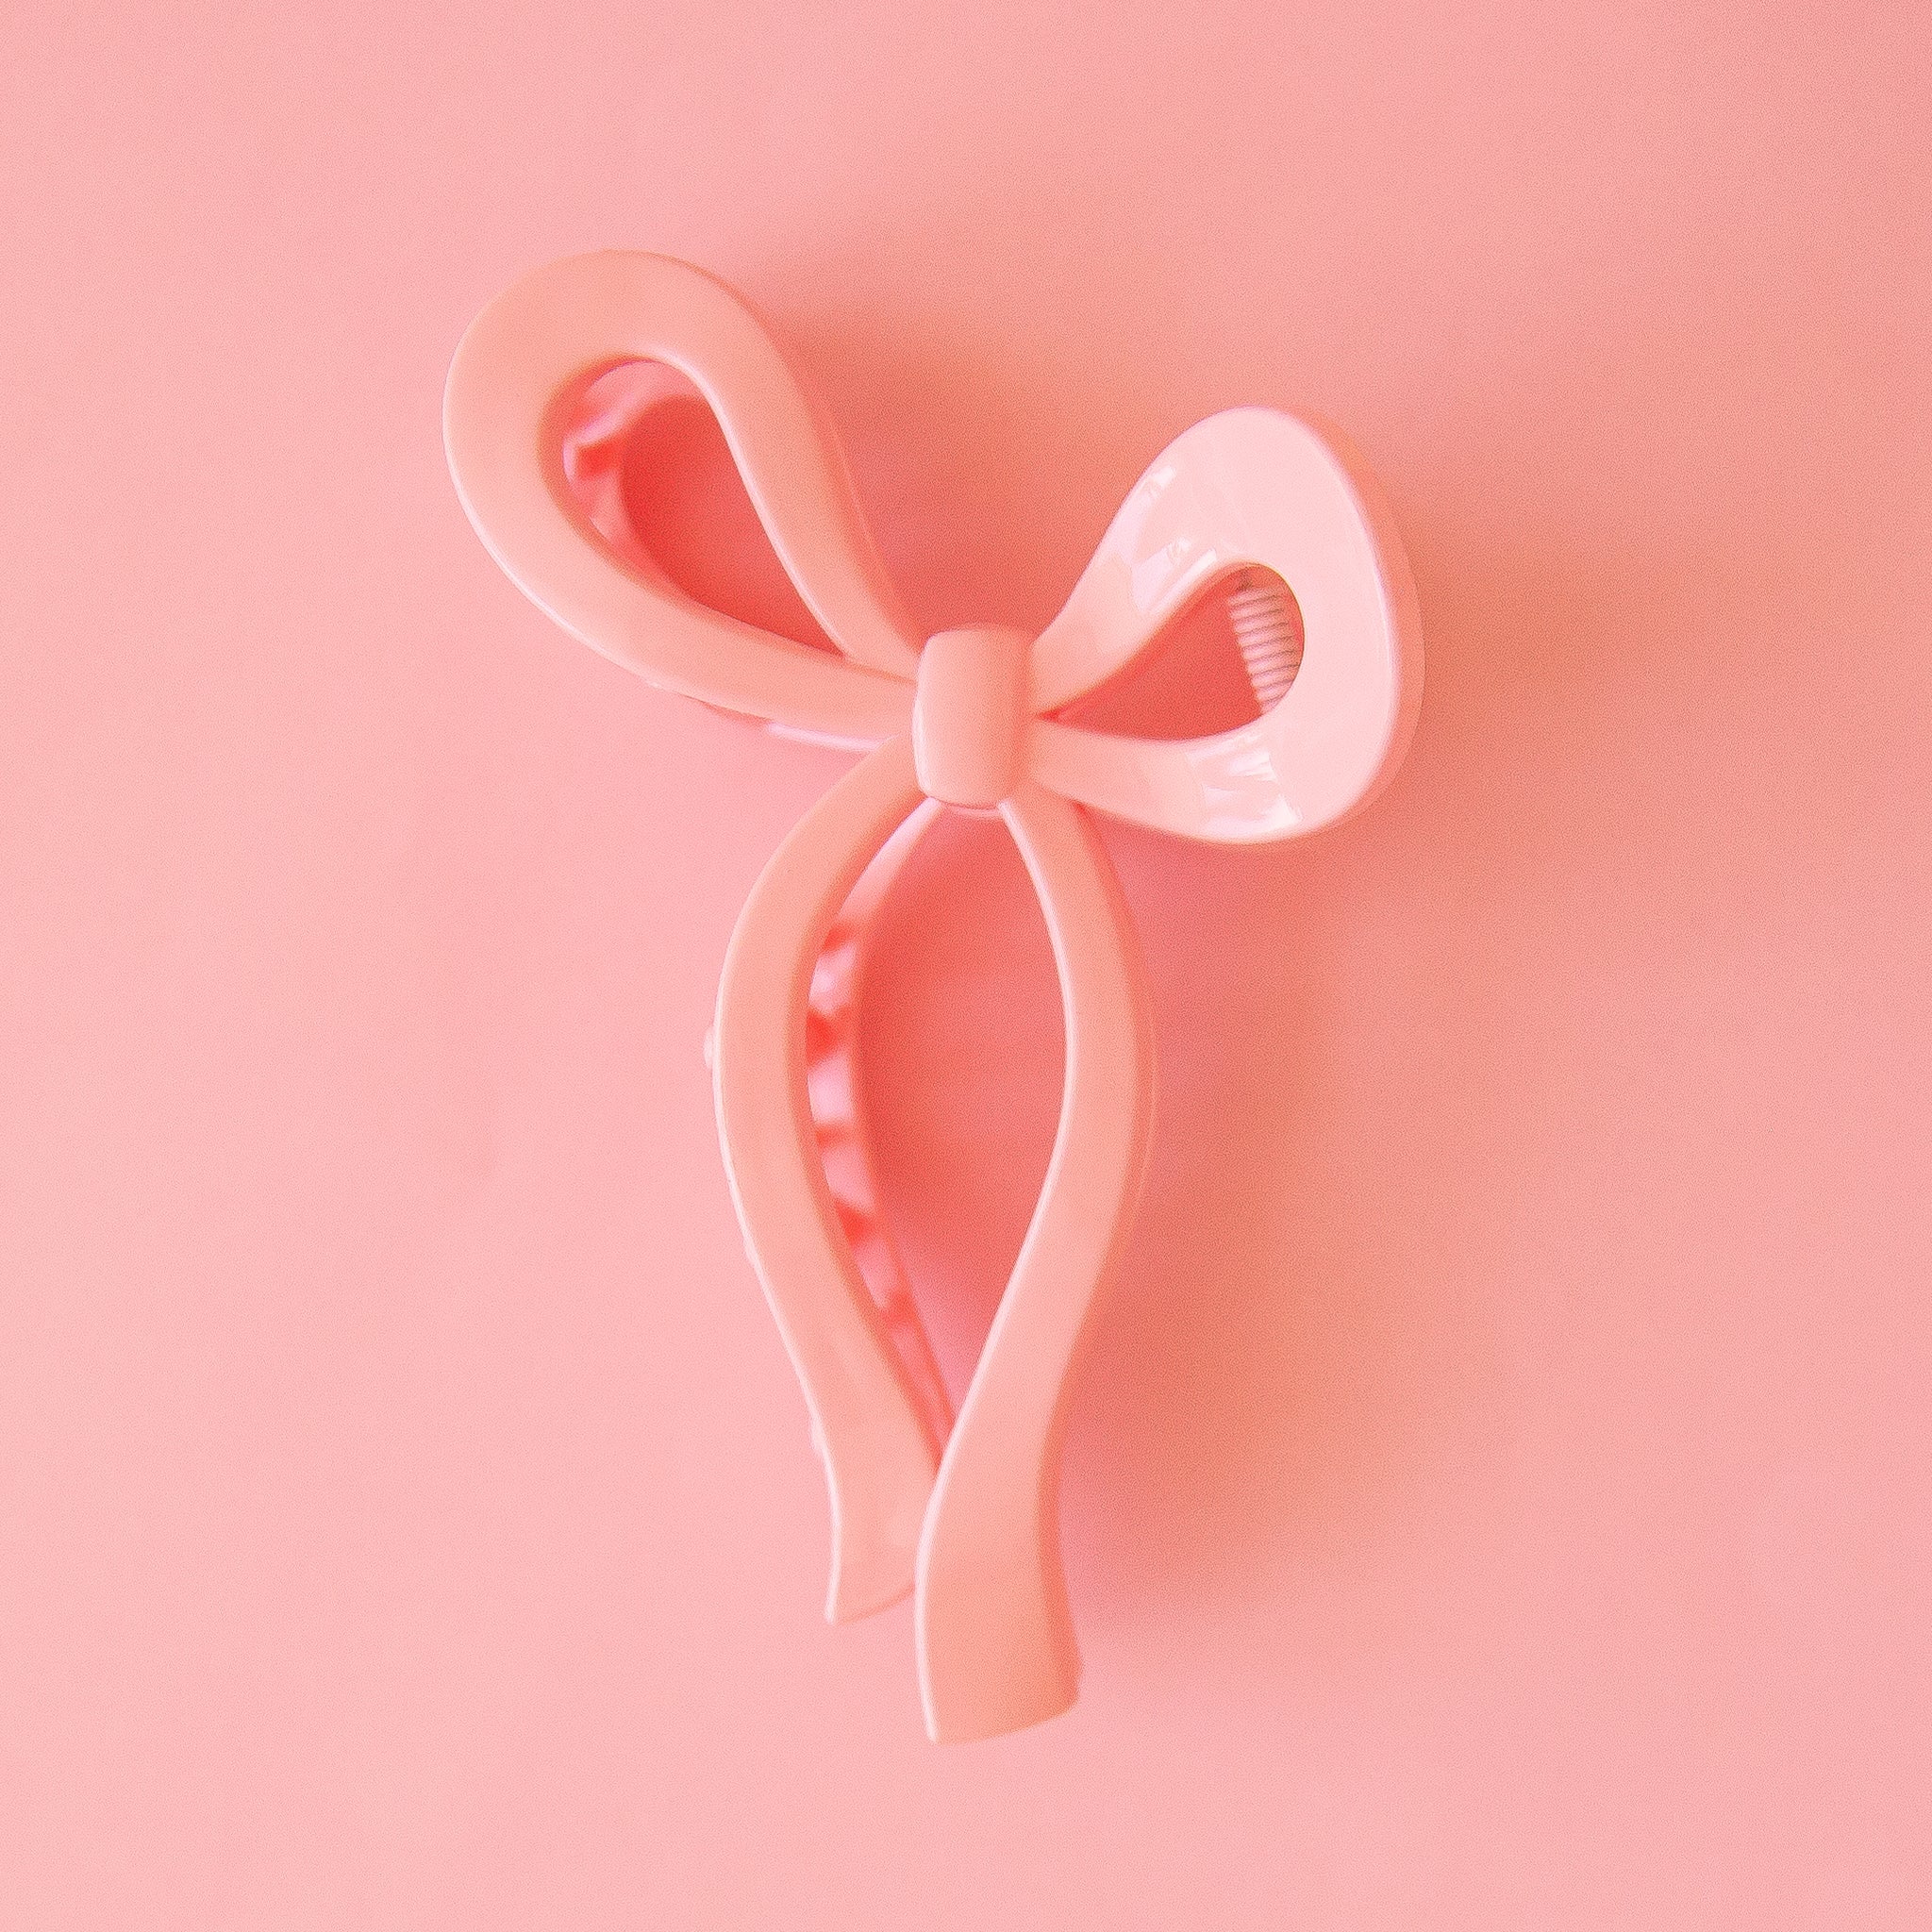 On a pink background is a pink knotted bow shaped hair clip.